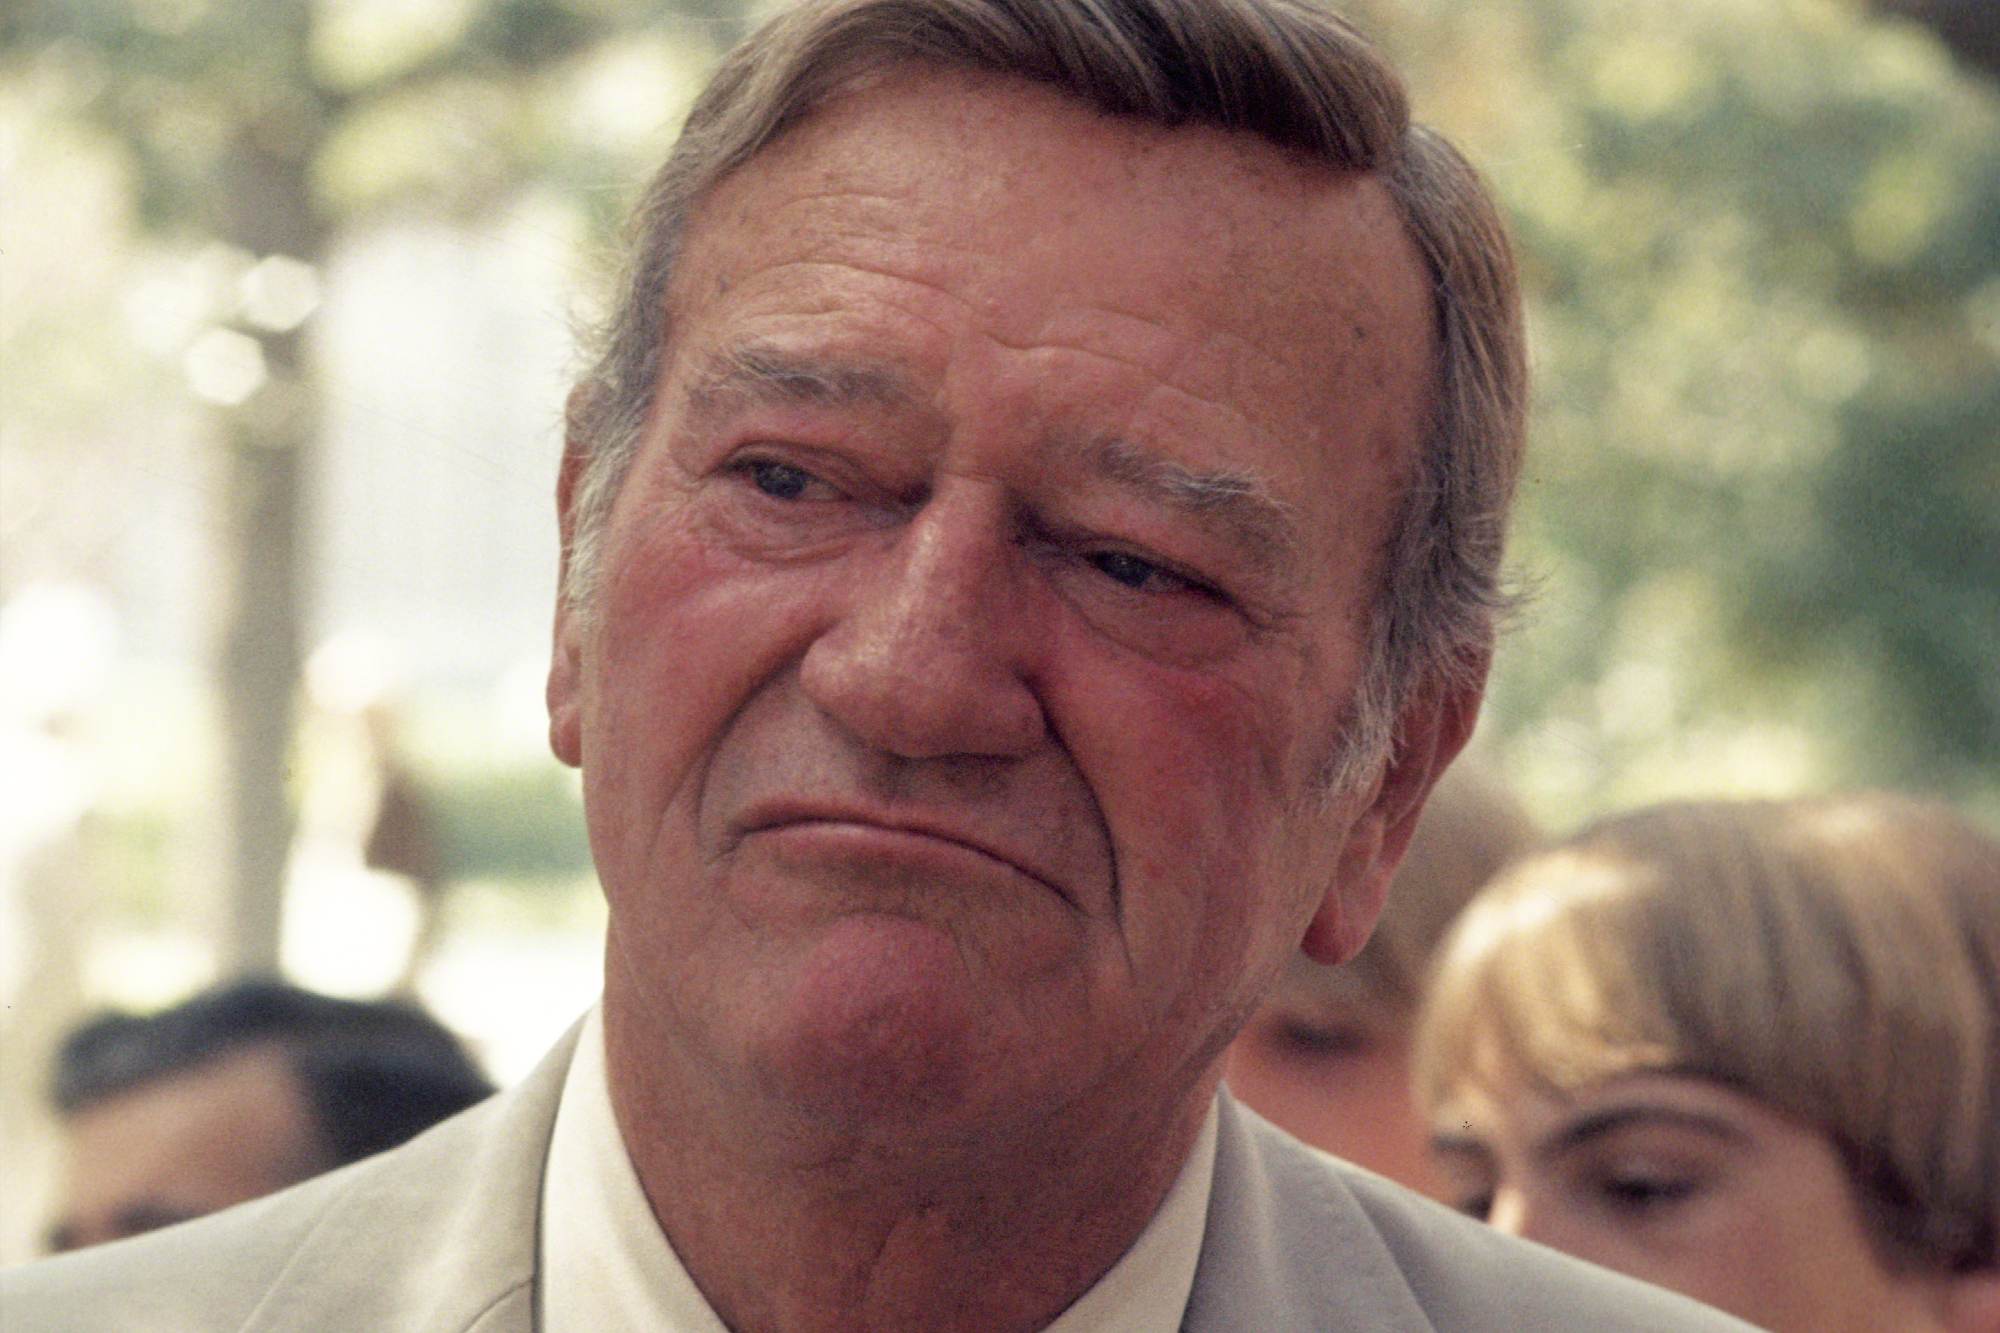 John Wayne, an actor from America. He's wearing a suit, looking to the side, with a frown.